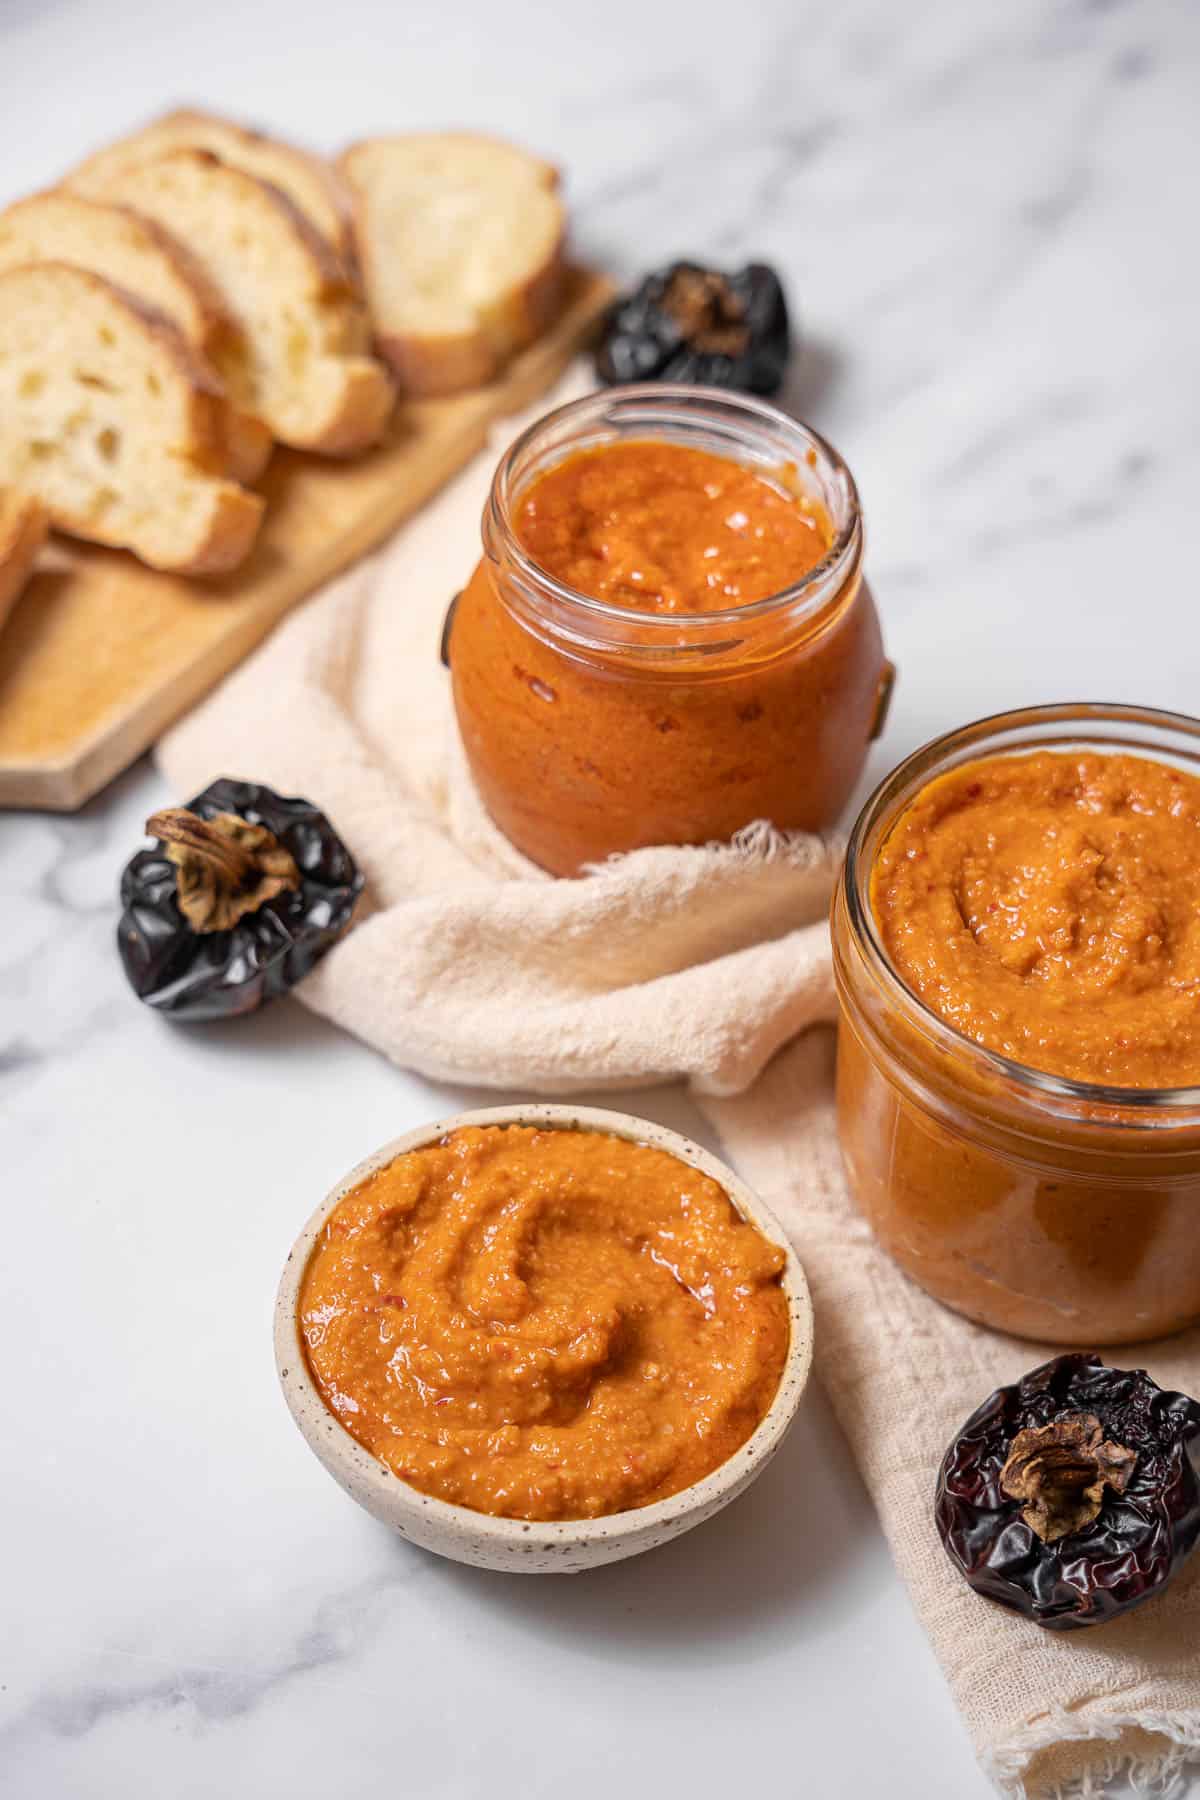 jars of romesco sauce with ñora peppers and bread.